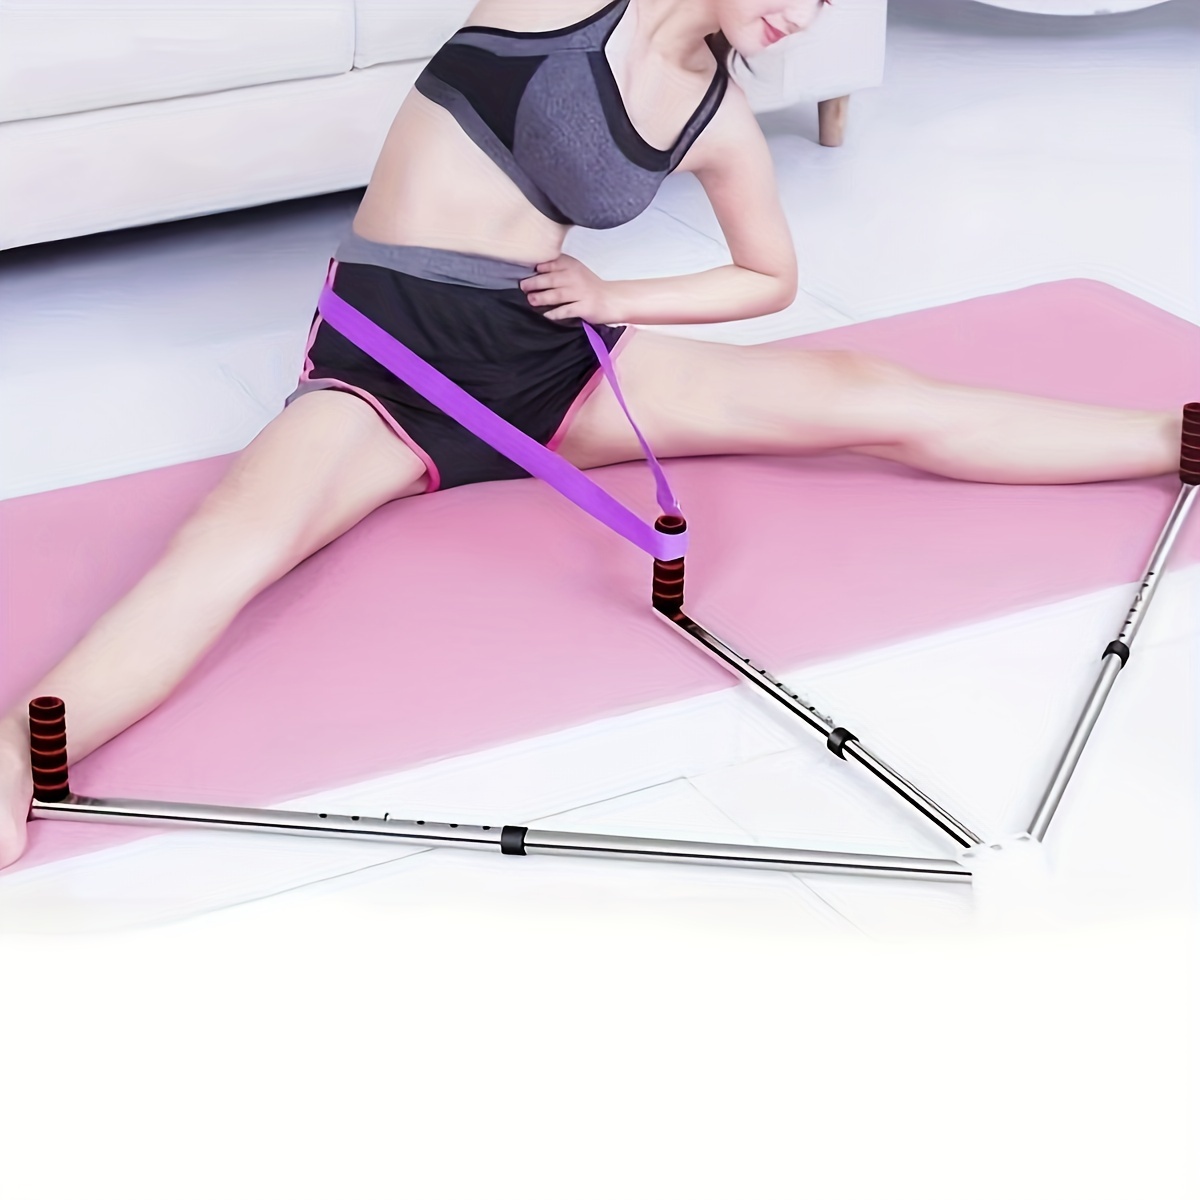 

Adjustable Leg Stretcher, Portable Retractable Yoga Dance Training Device, Fitness Foldable Leg Stretching Tools, Fitness Yoga Supplies For Home Gym Workouts